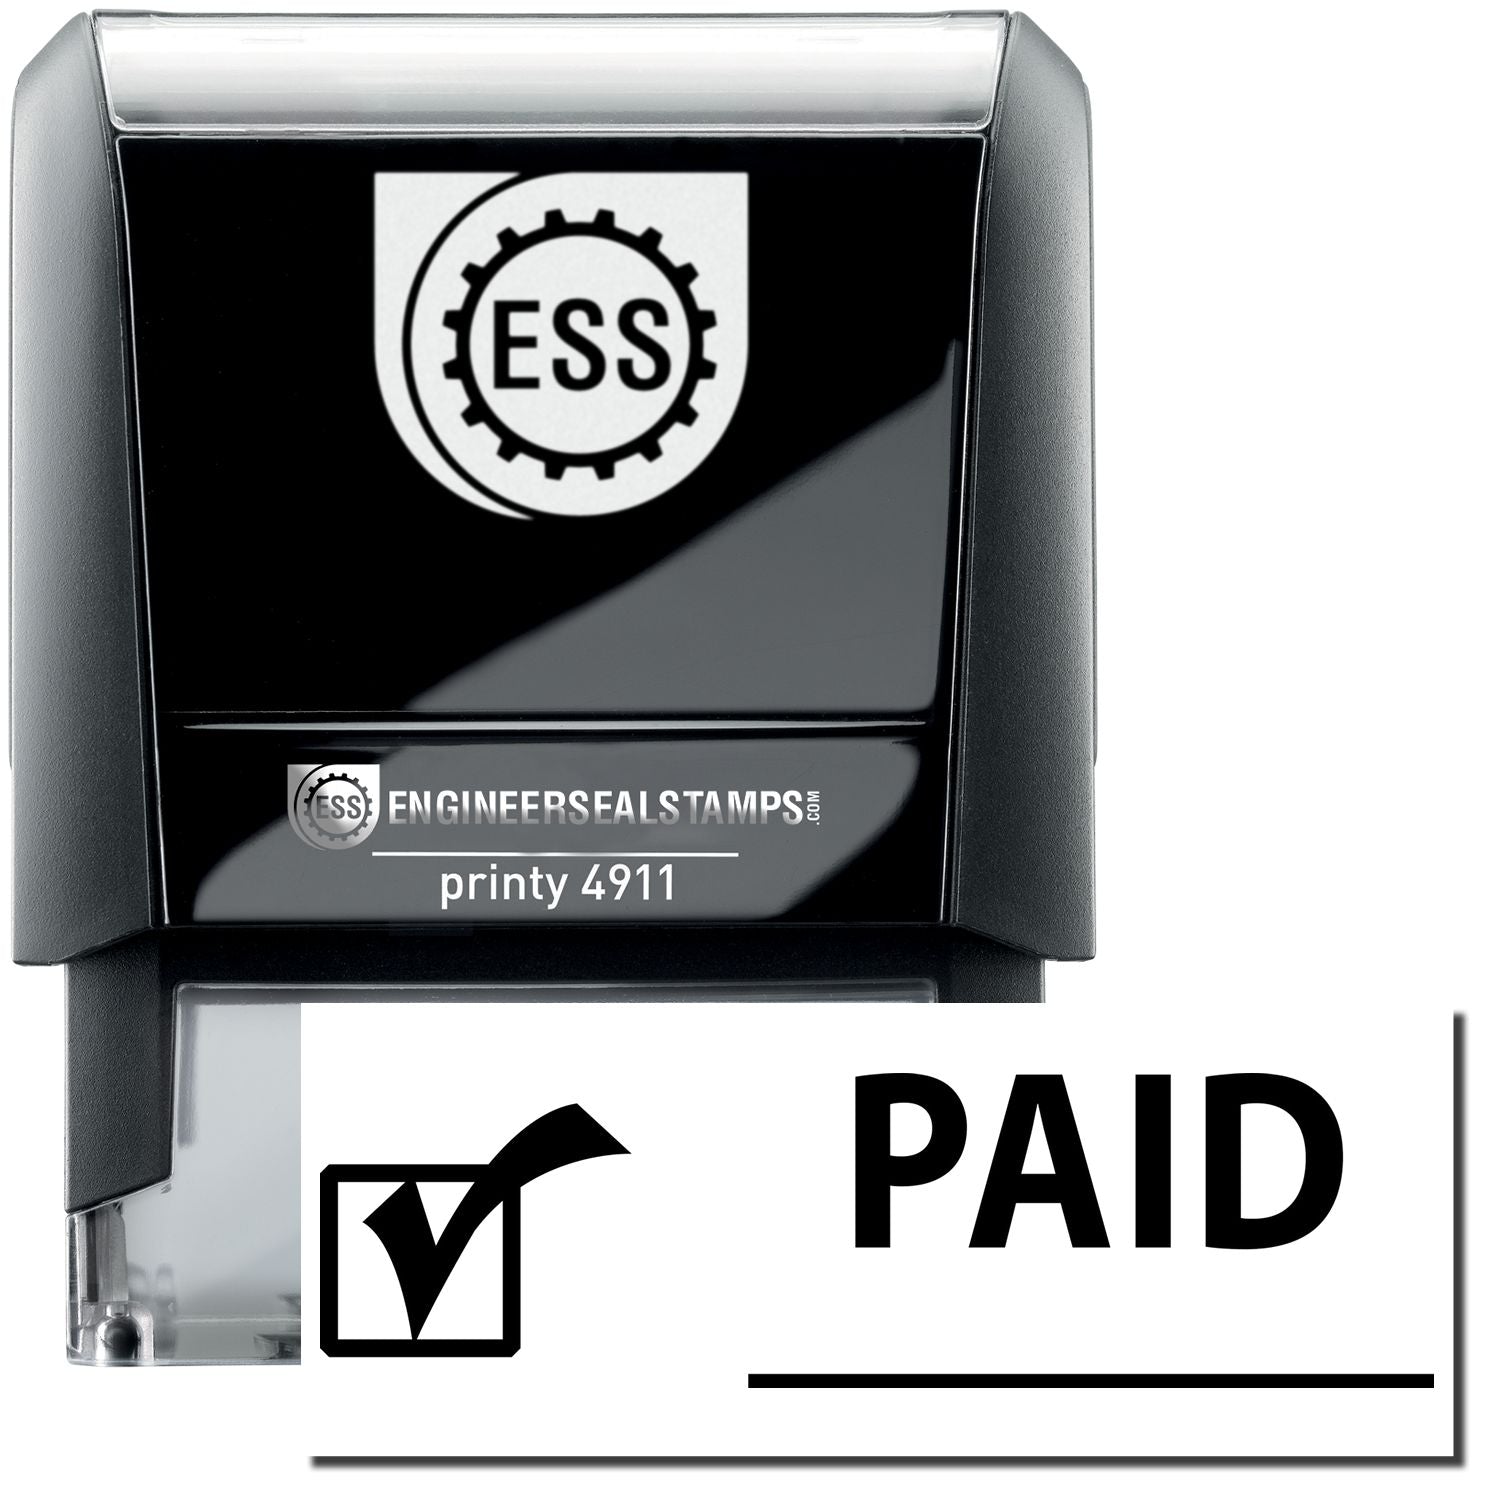 A self-inking stamp with a stamped image showing how the text "PAID" with a checkmark icon on the left and a broad line on the right is displayed after stamping.